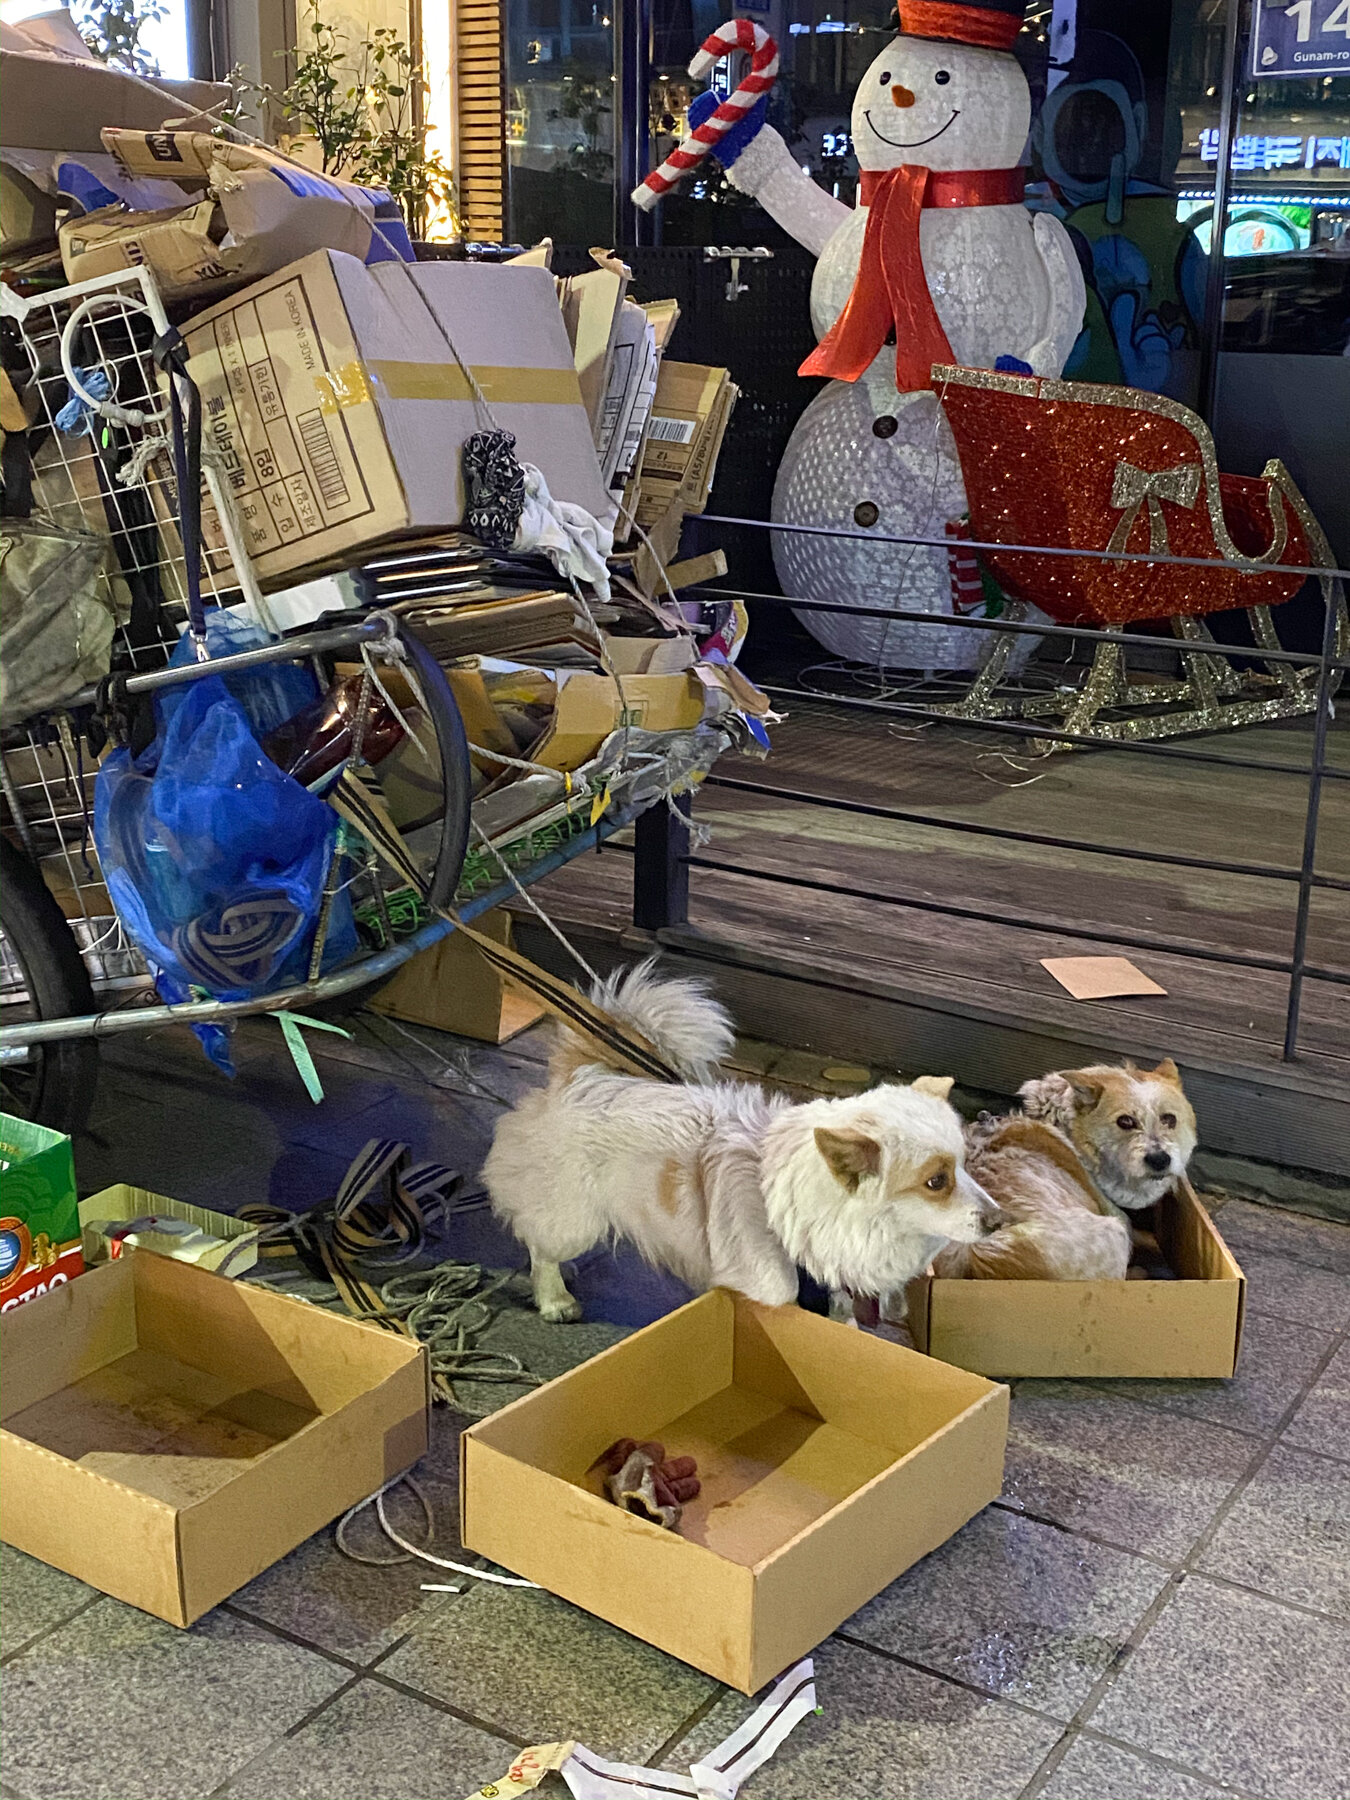 Cute dogs hanging out in cardboard boxes-Haeundae Beach